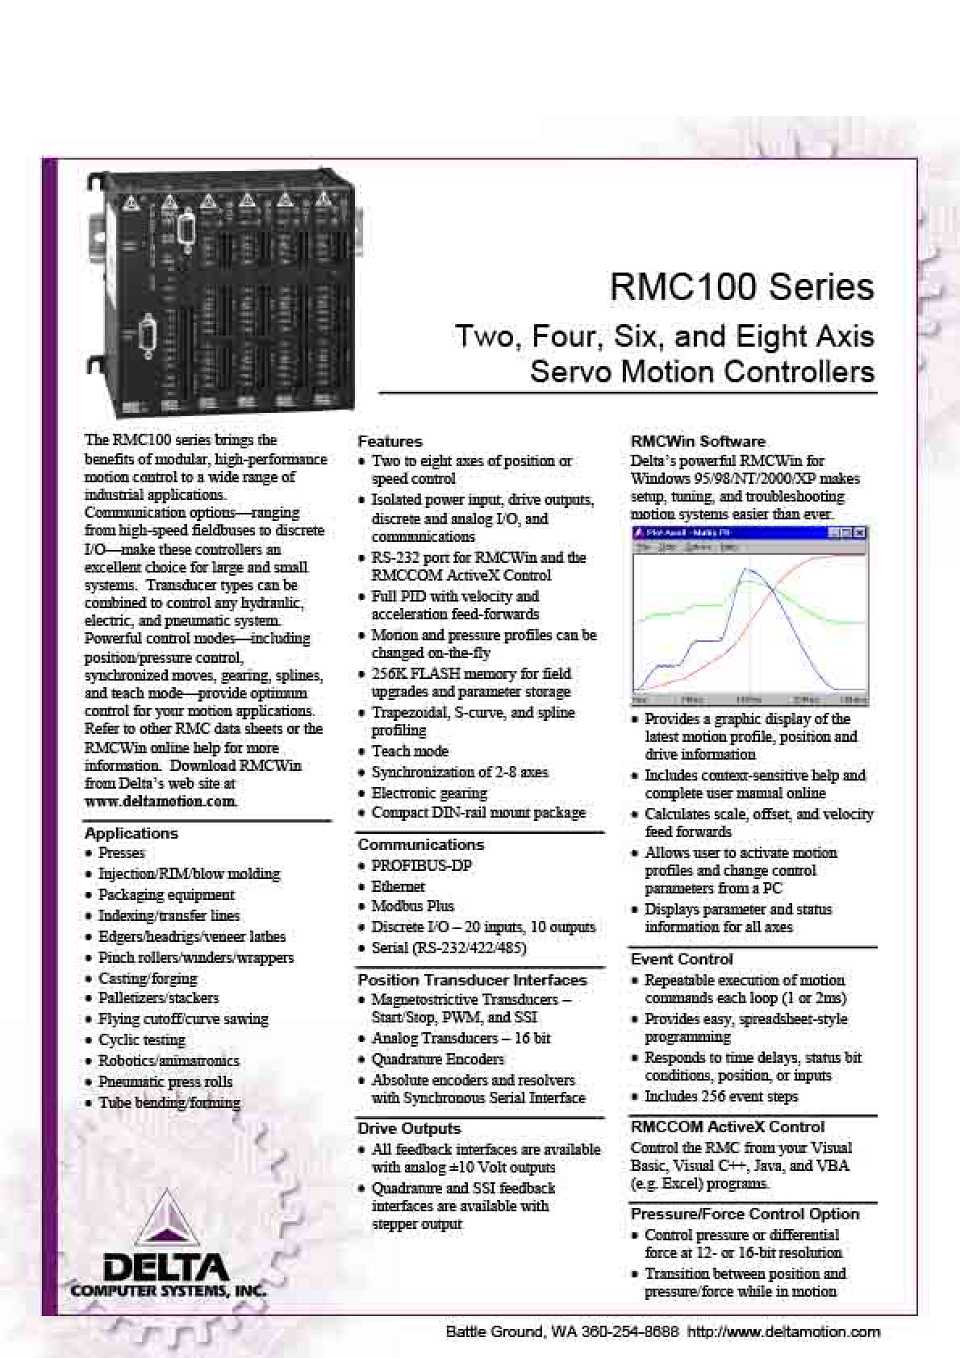 RMC 100 Series Catalogue Cover